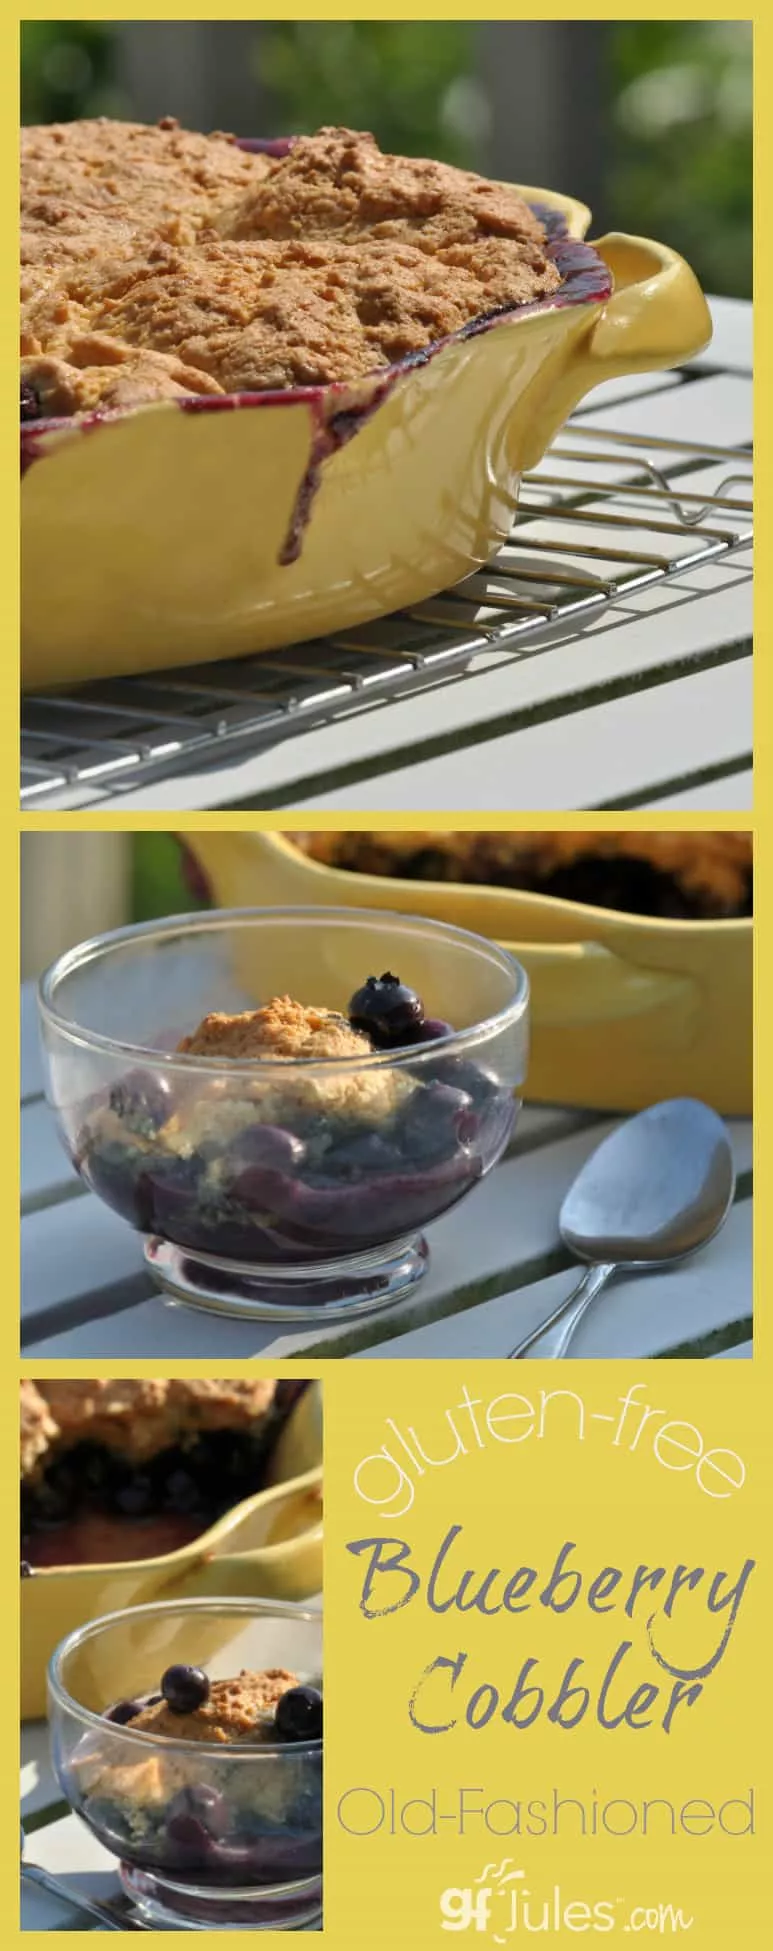 In order to deliciously employ my current overabundance of blueberries, I turned to this old-fashioned blueberry cobbler recipe (made gluten-free, of course). It will please any guest or picky neighbor, and rid you of the guilt stemming from a glut of berries! gfJules.com